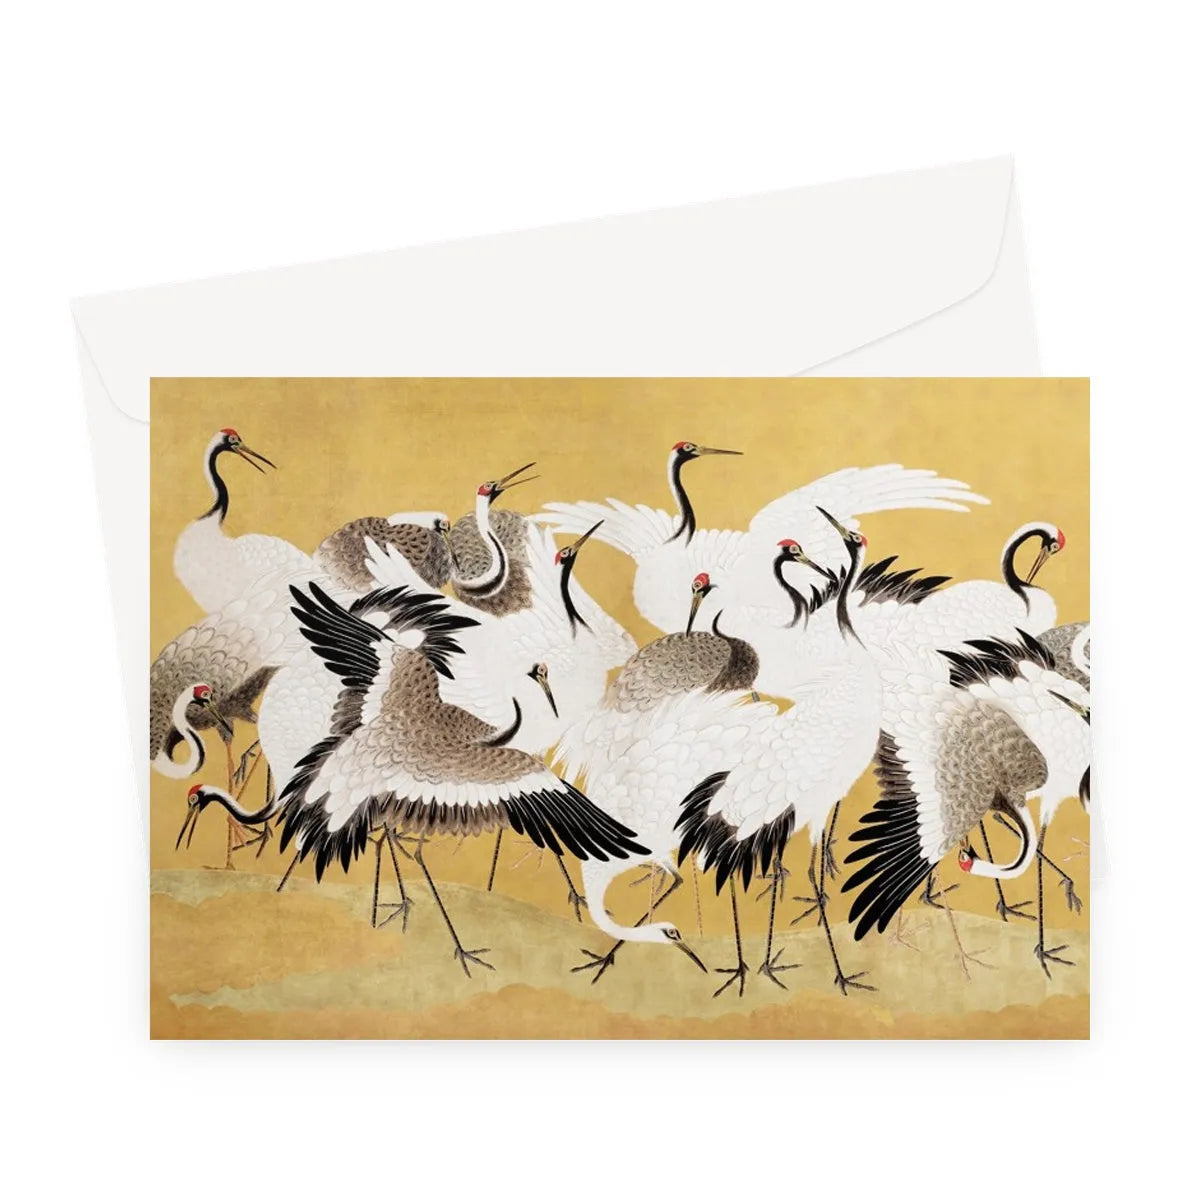 Flock Of Cranes By Ishida Yūtei Greeting Card - A5 Landscape / 1 Card - Notebooks & Notepads - Aesthetic Art